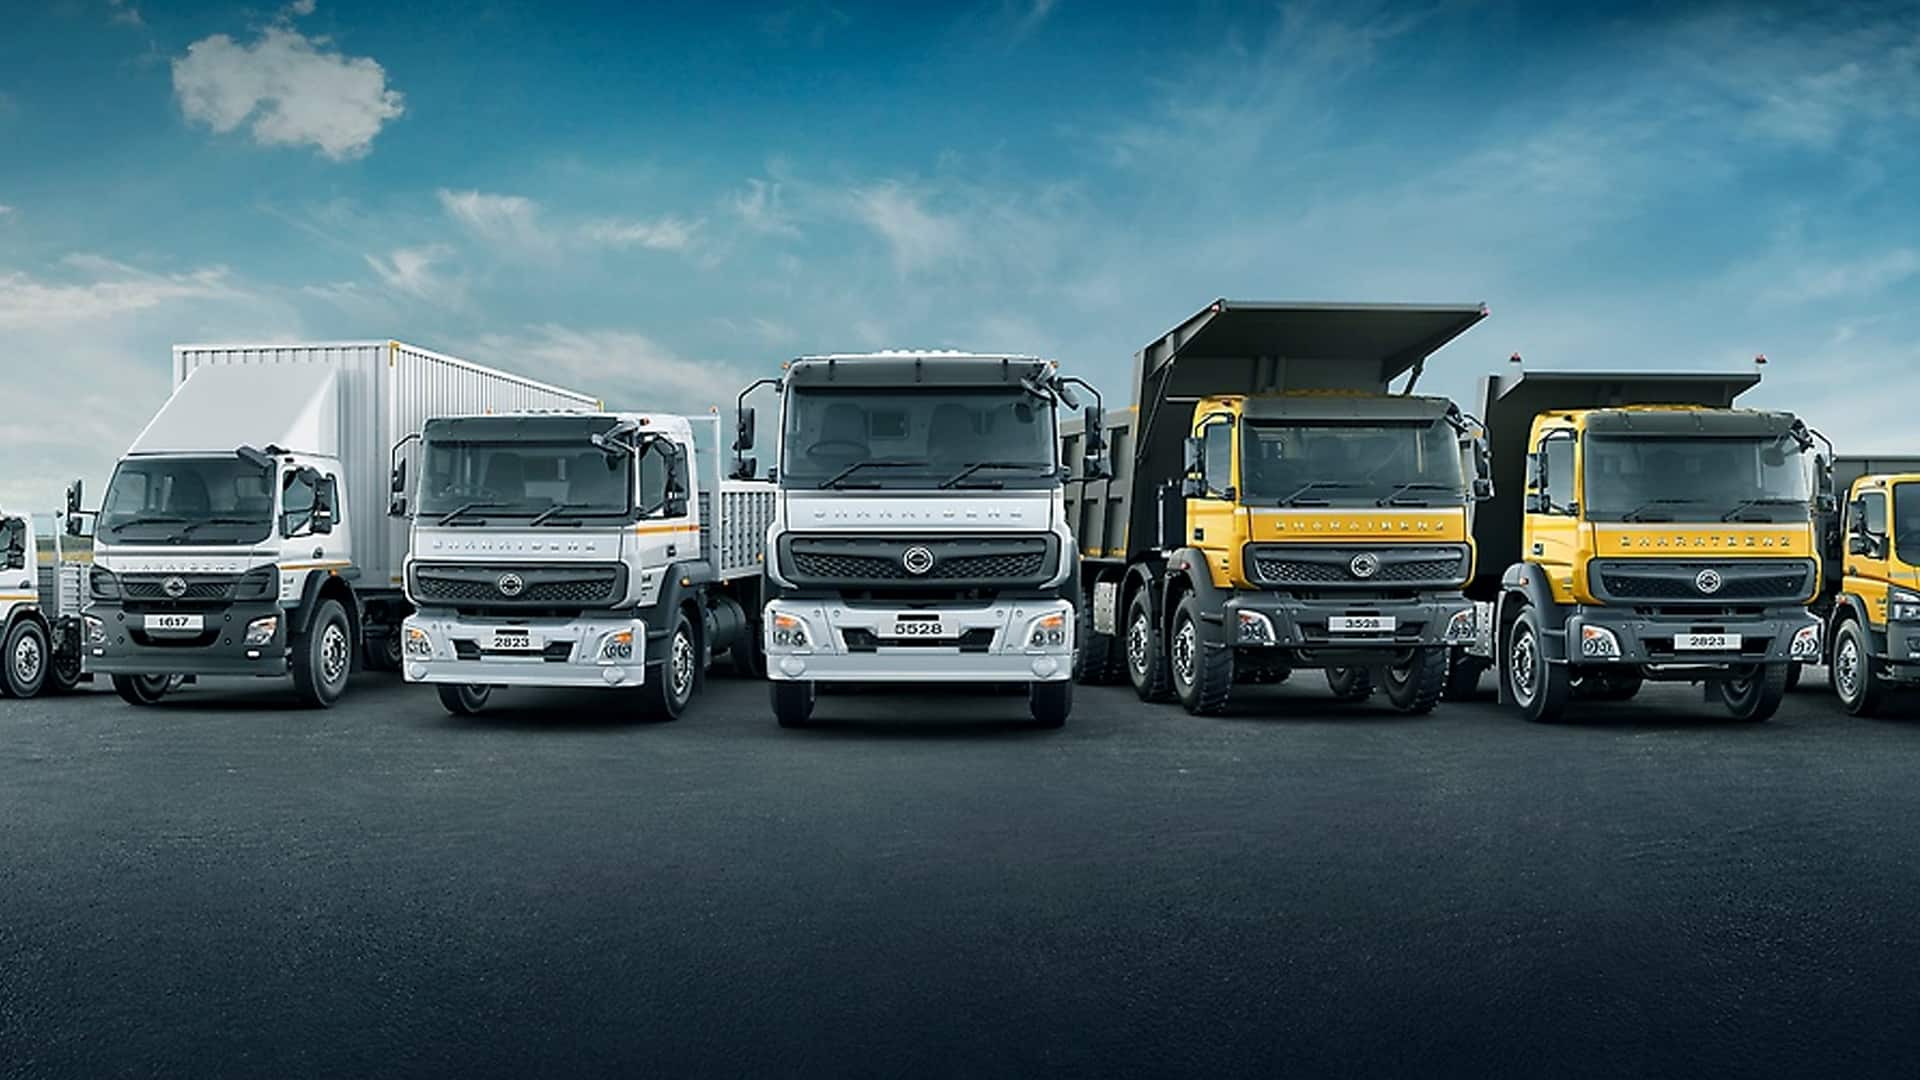 Daimler's arm DICV plans to provide free vaccine to truck drivers